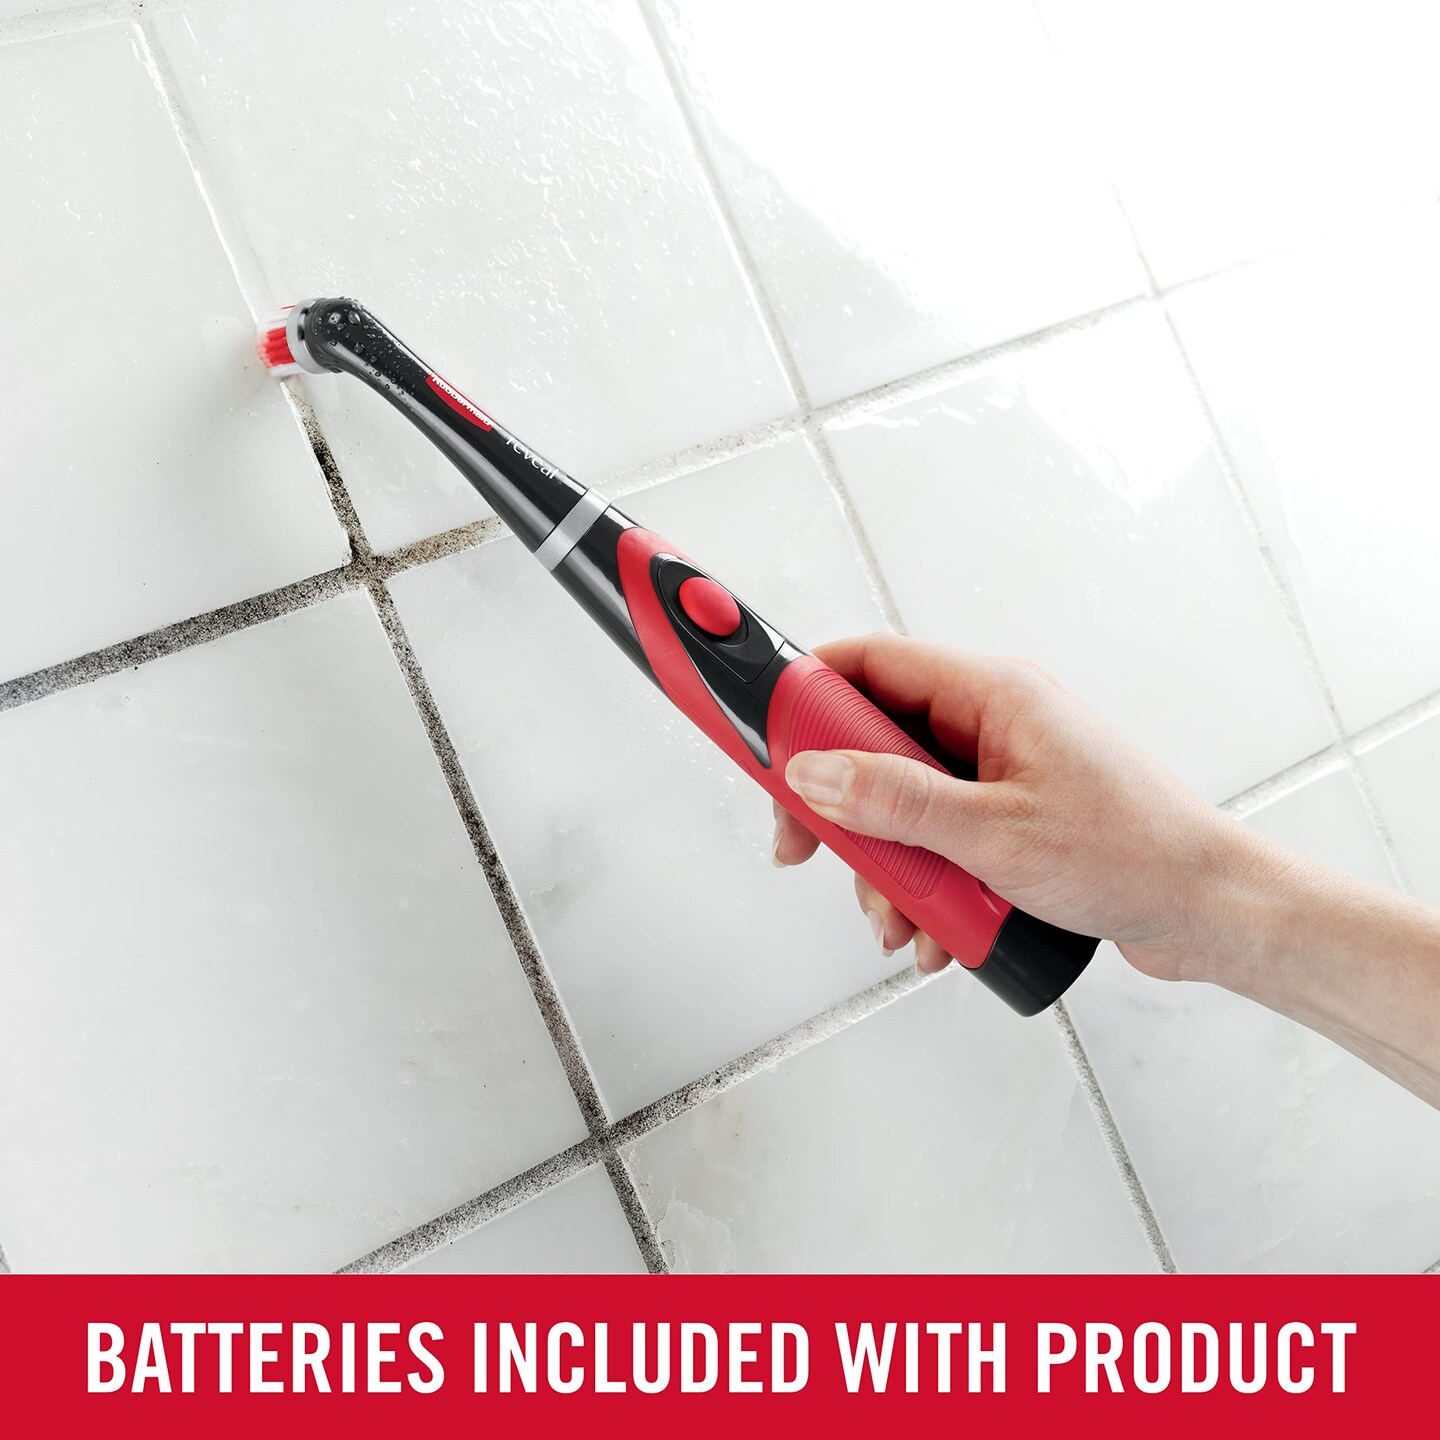 Rubbermaid Reveal Cordless Battery Power Scrubber, Red, Multi-Purpose